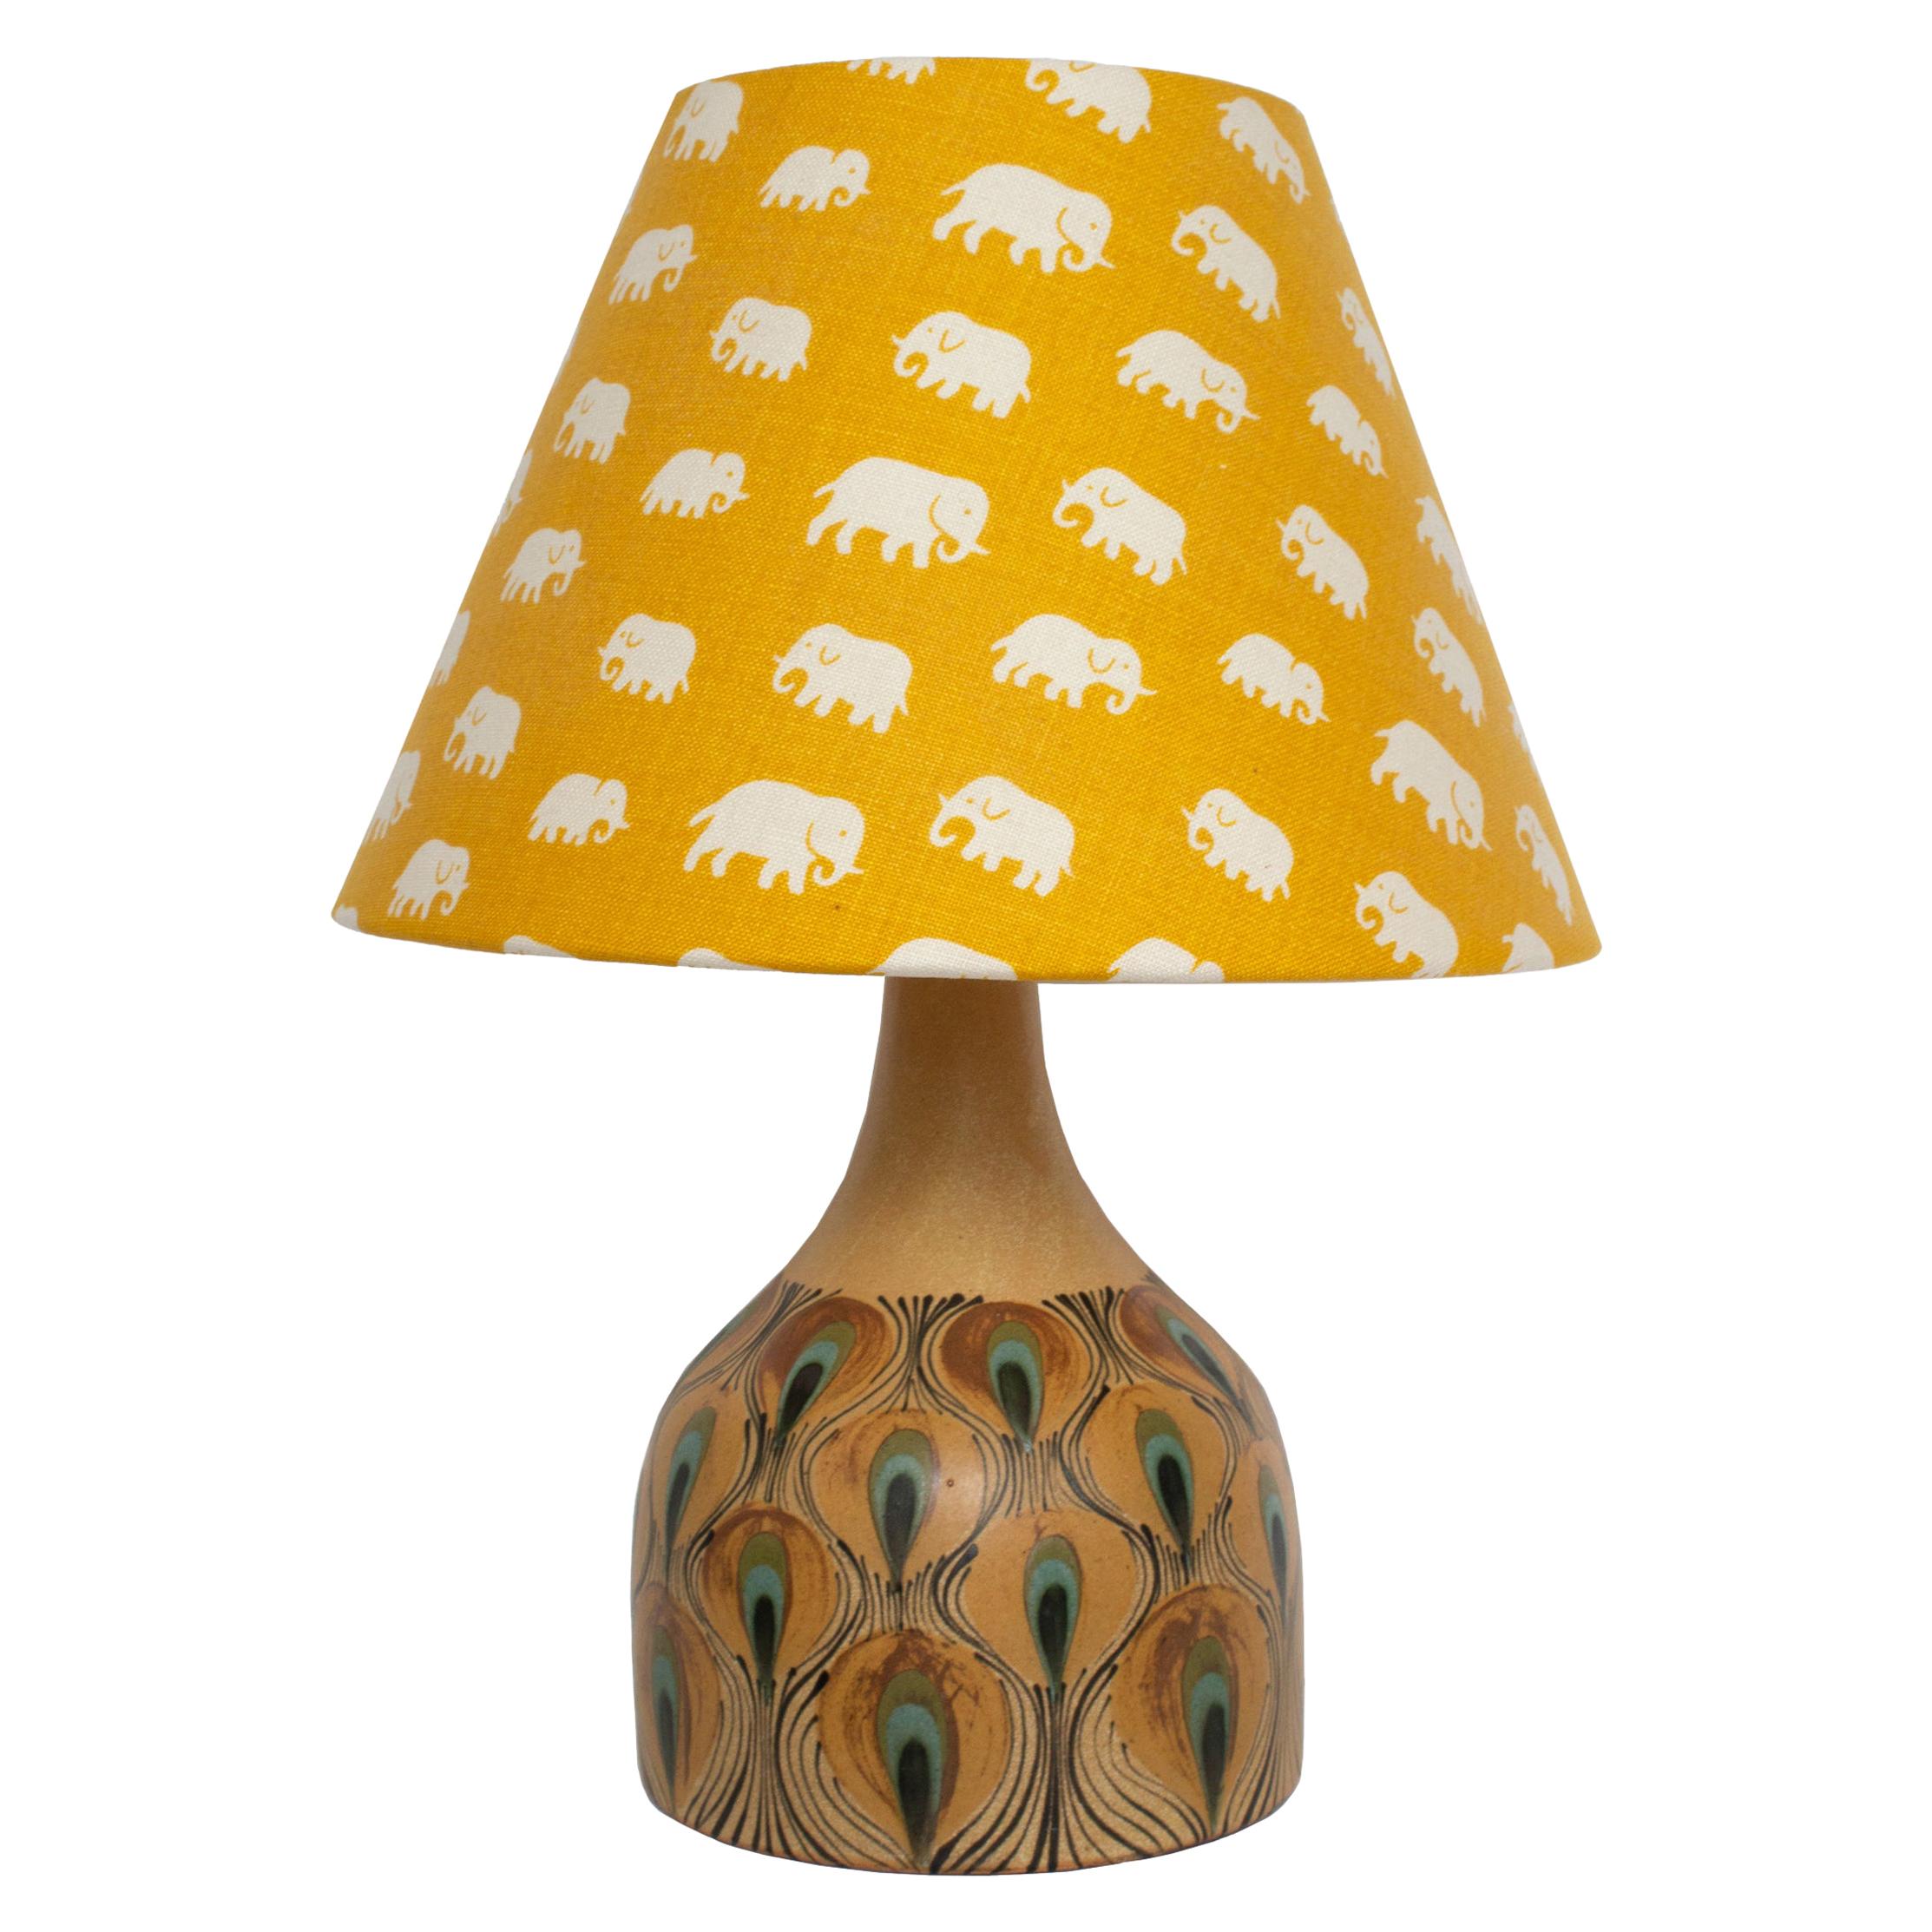 Mid-Century Modern Danish Table Lamp with Peacock Pattern by Margrethe Dybdahl For Sale